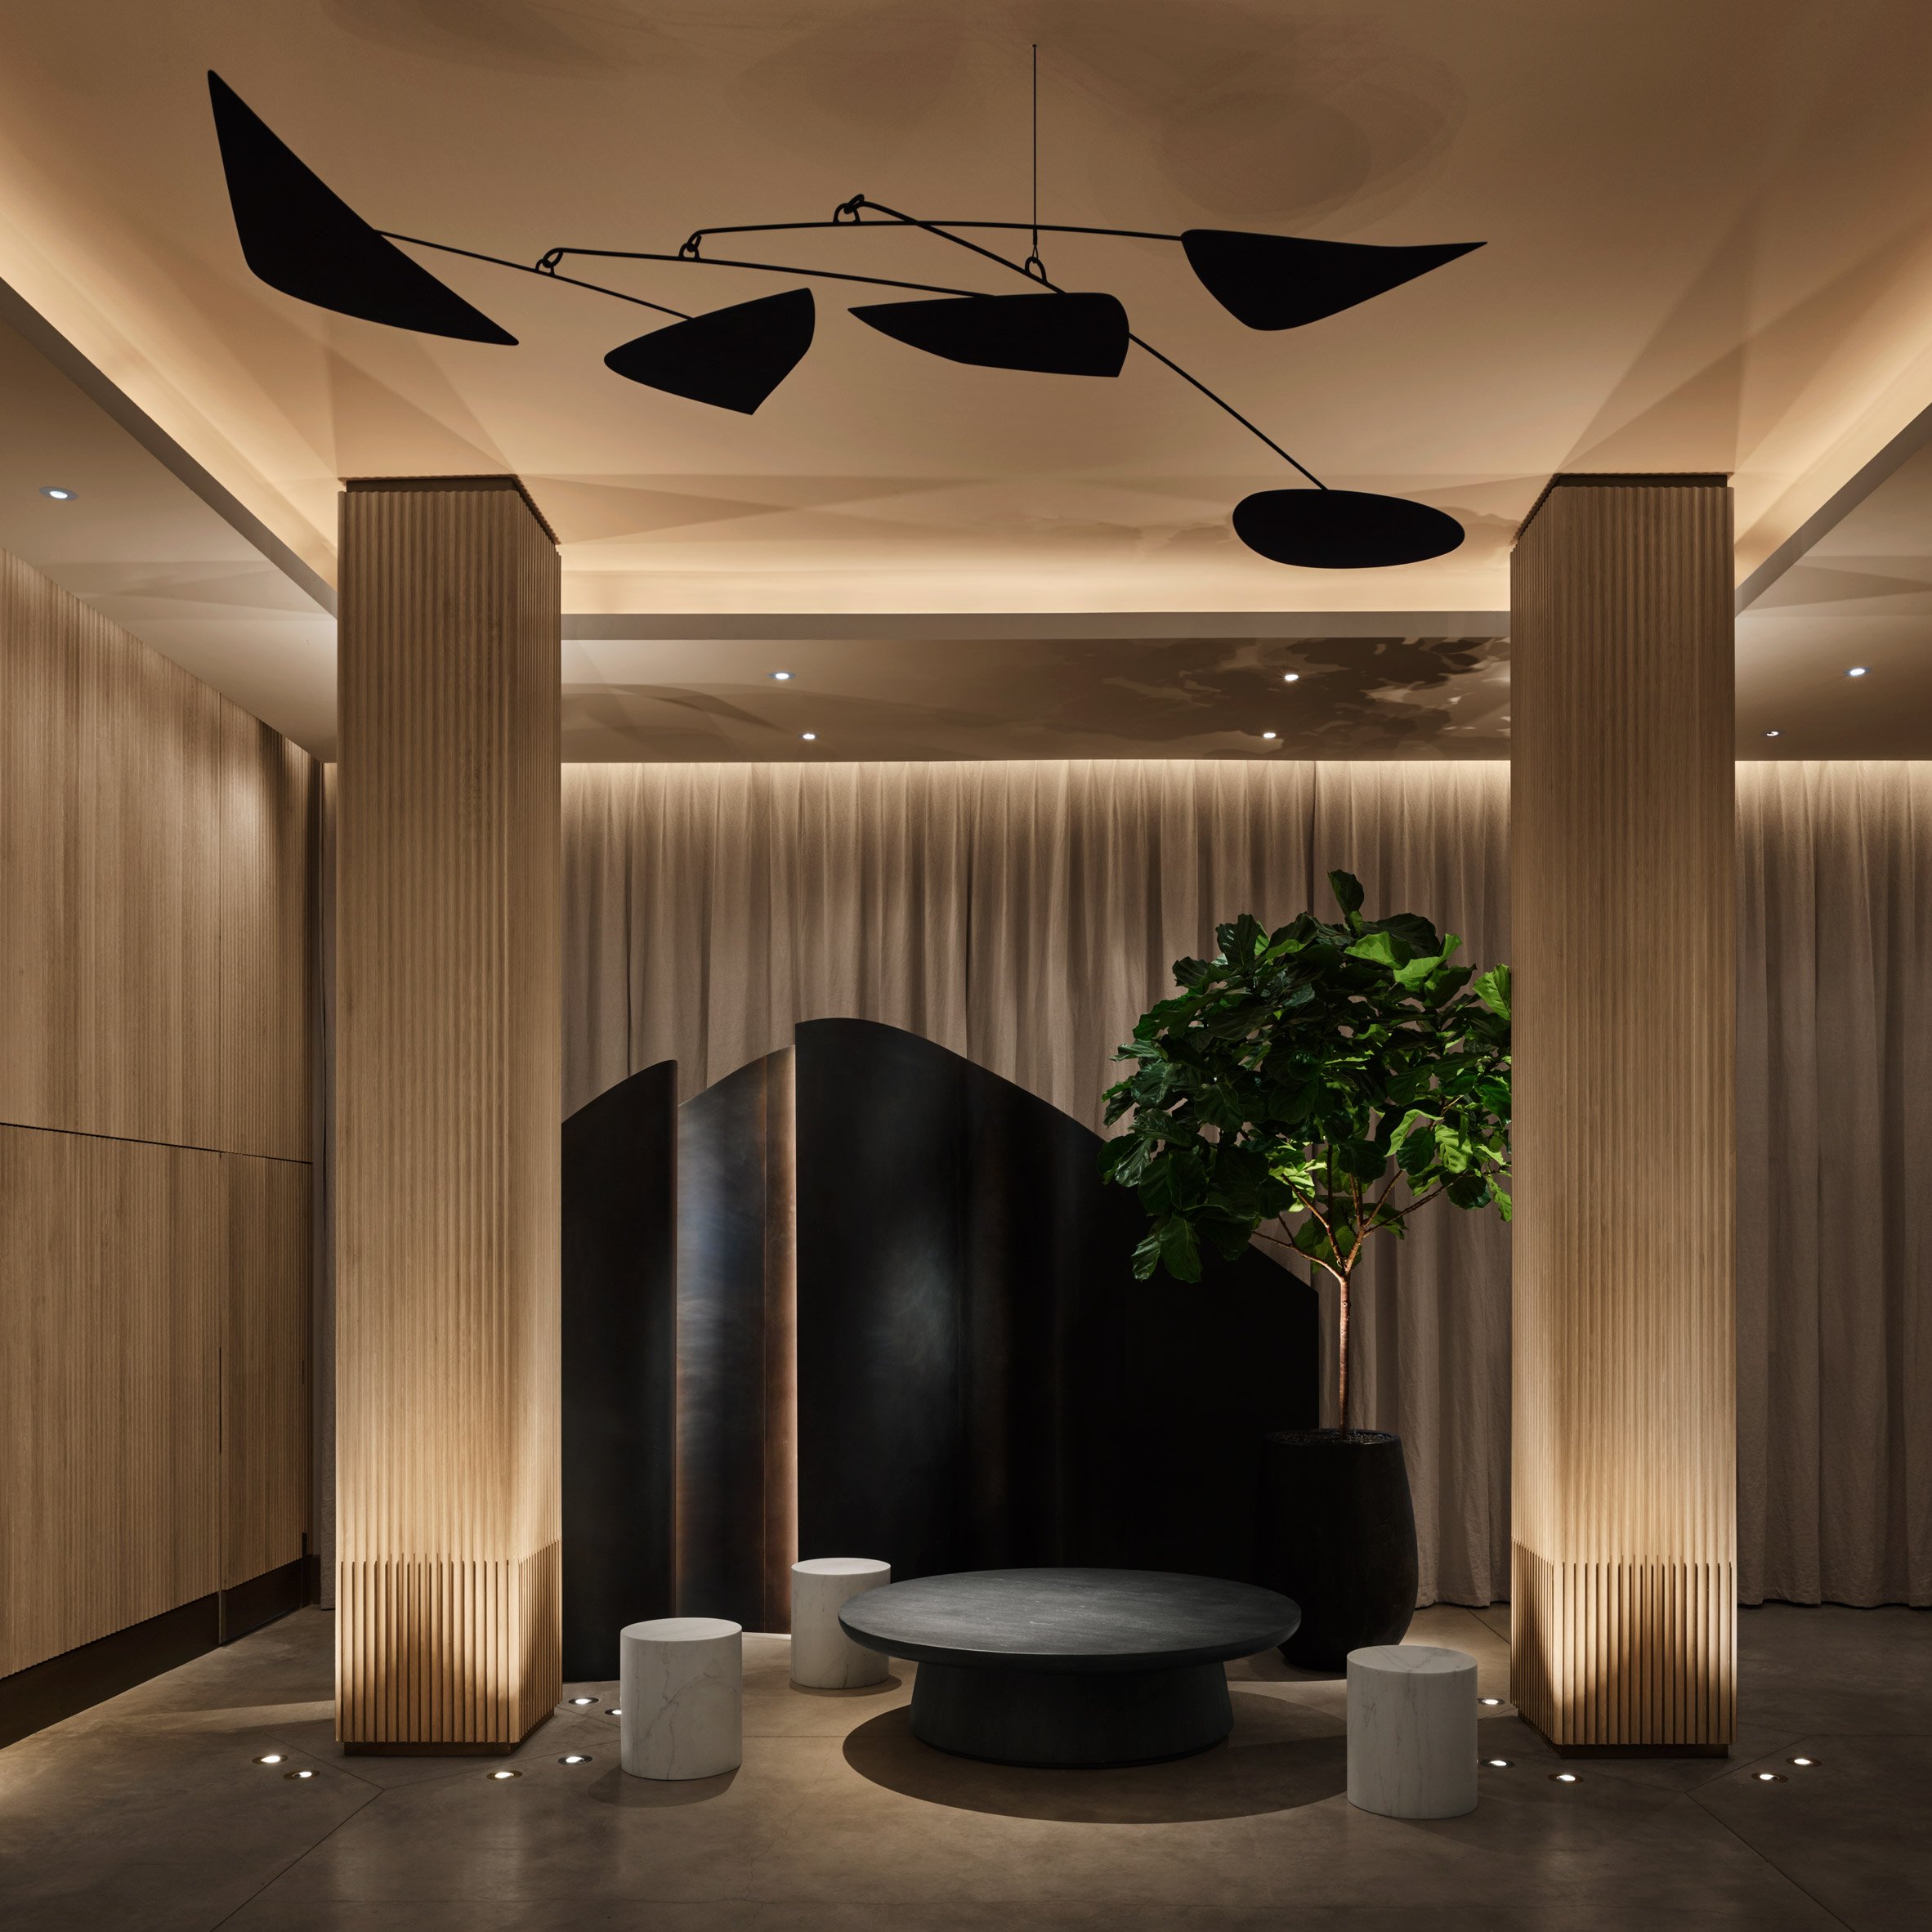 Anda Andrei's AHEAD nominated design for the 11 Howard Hotel in New York